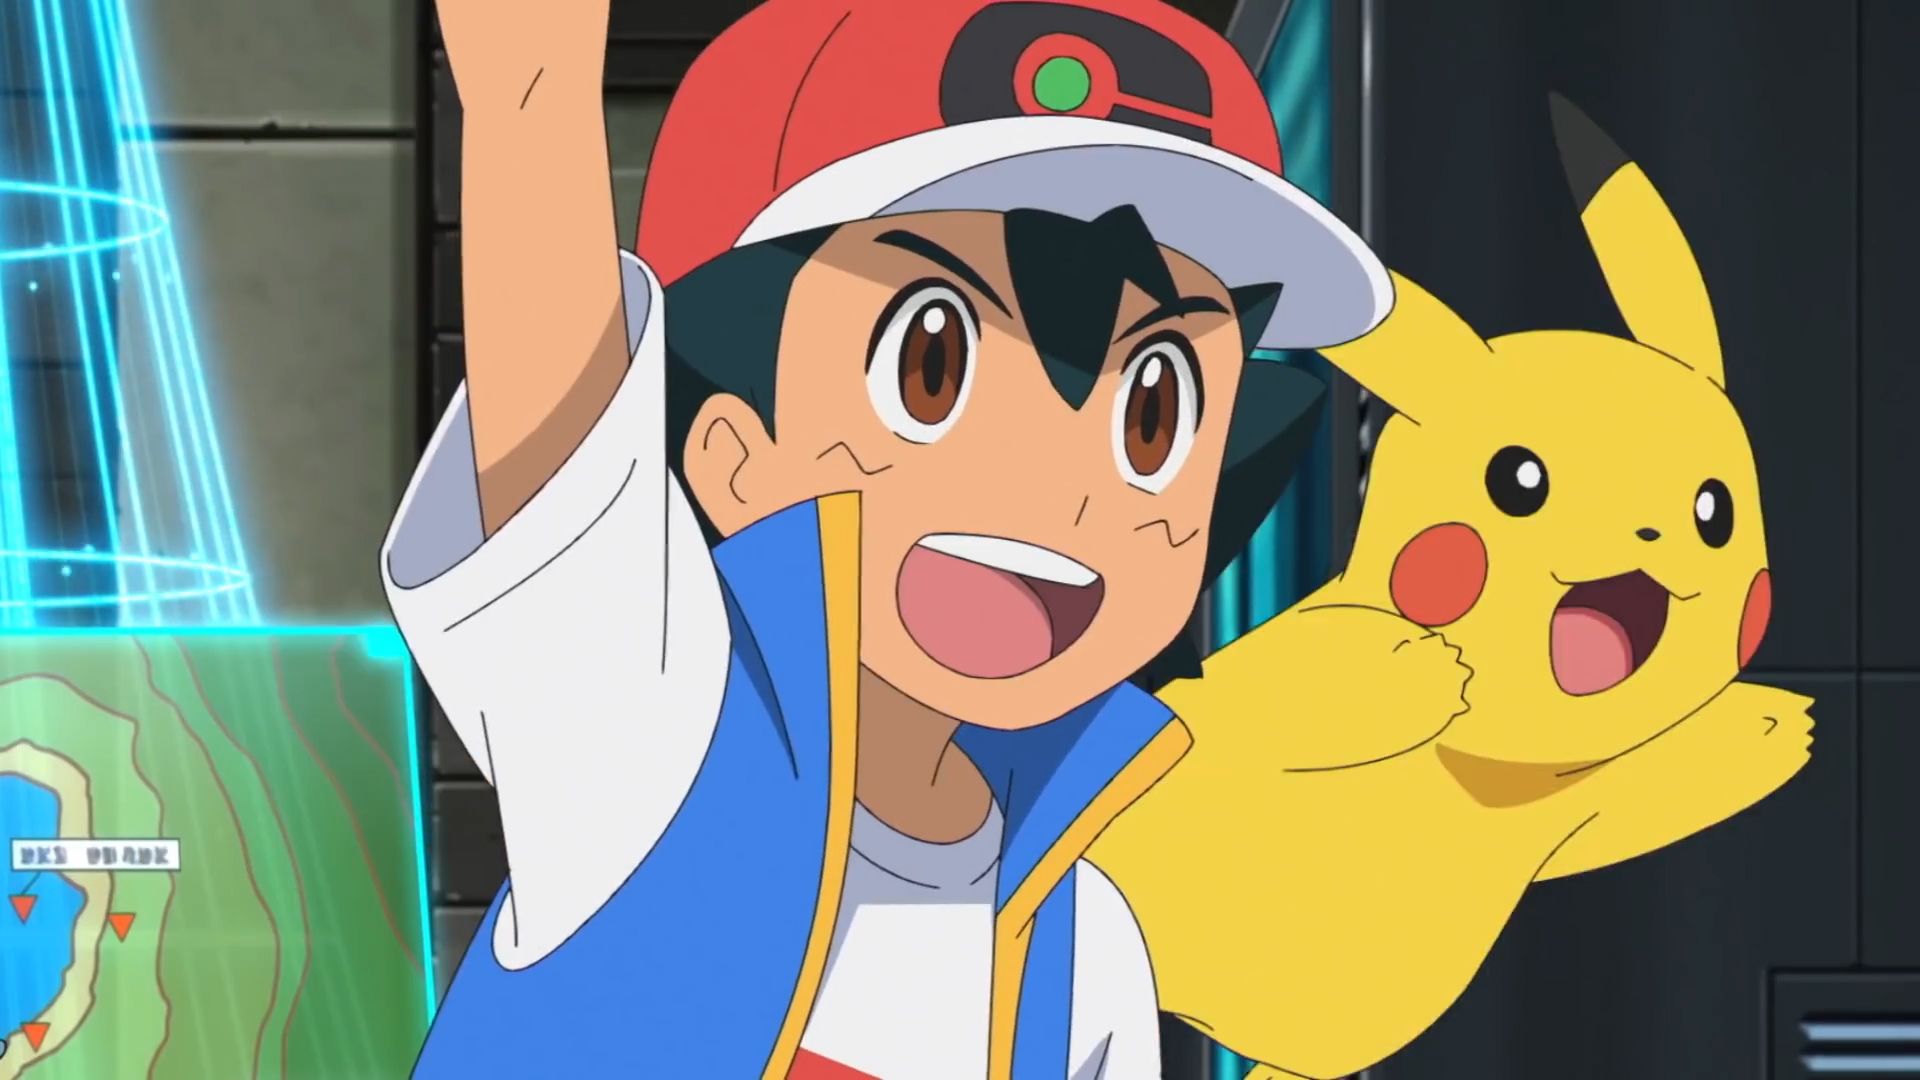 Fans Get Emotional As Ash Ketchum's Story In 'Pokemon' Comes To A Close  After 26 Years